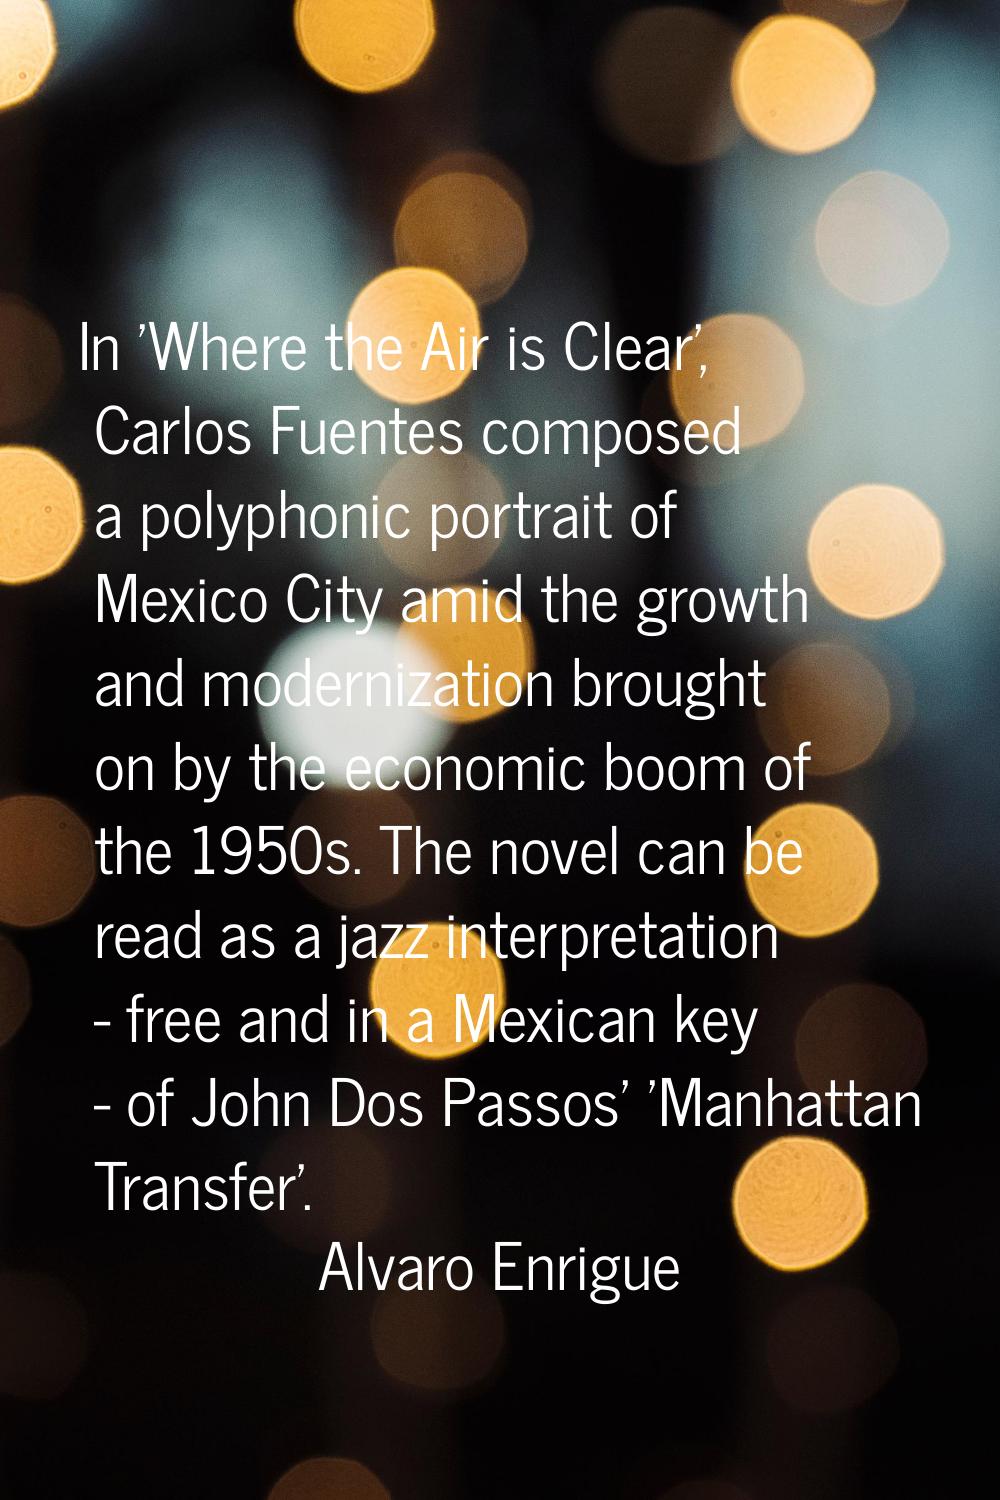 In 'Where the Air is Clear', Carlos Fuentes composed a polyphonic portrait of Mexico City amid the 